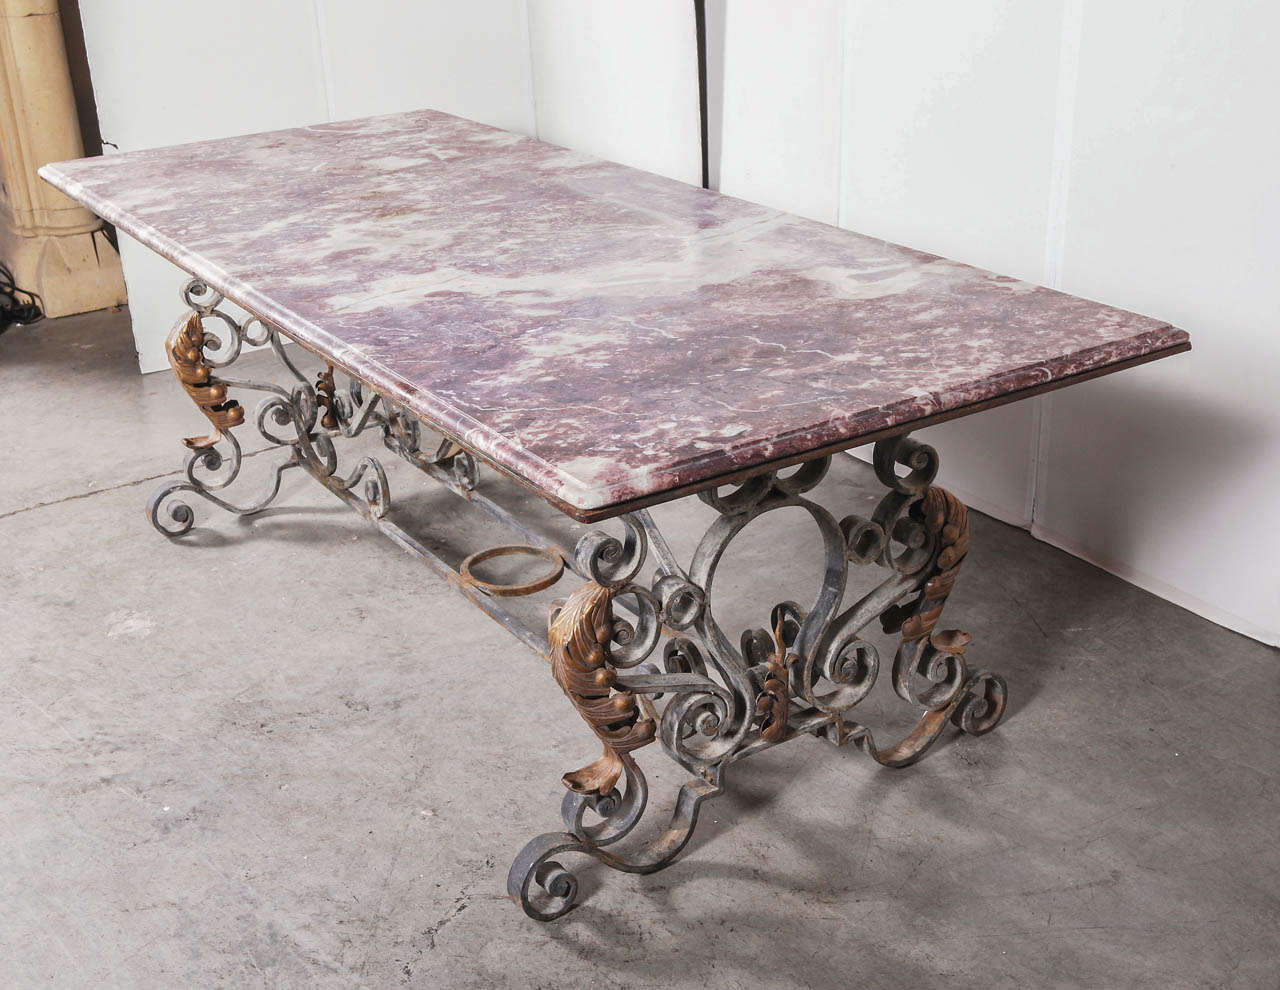 This stunning Period French Napoleon III table has a hand forged, thick iron base and its original marble top.  This versatile table can be used as dining tables, large entry hall tables and garden room tables, and are suitable for inside or